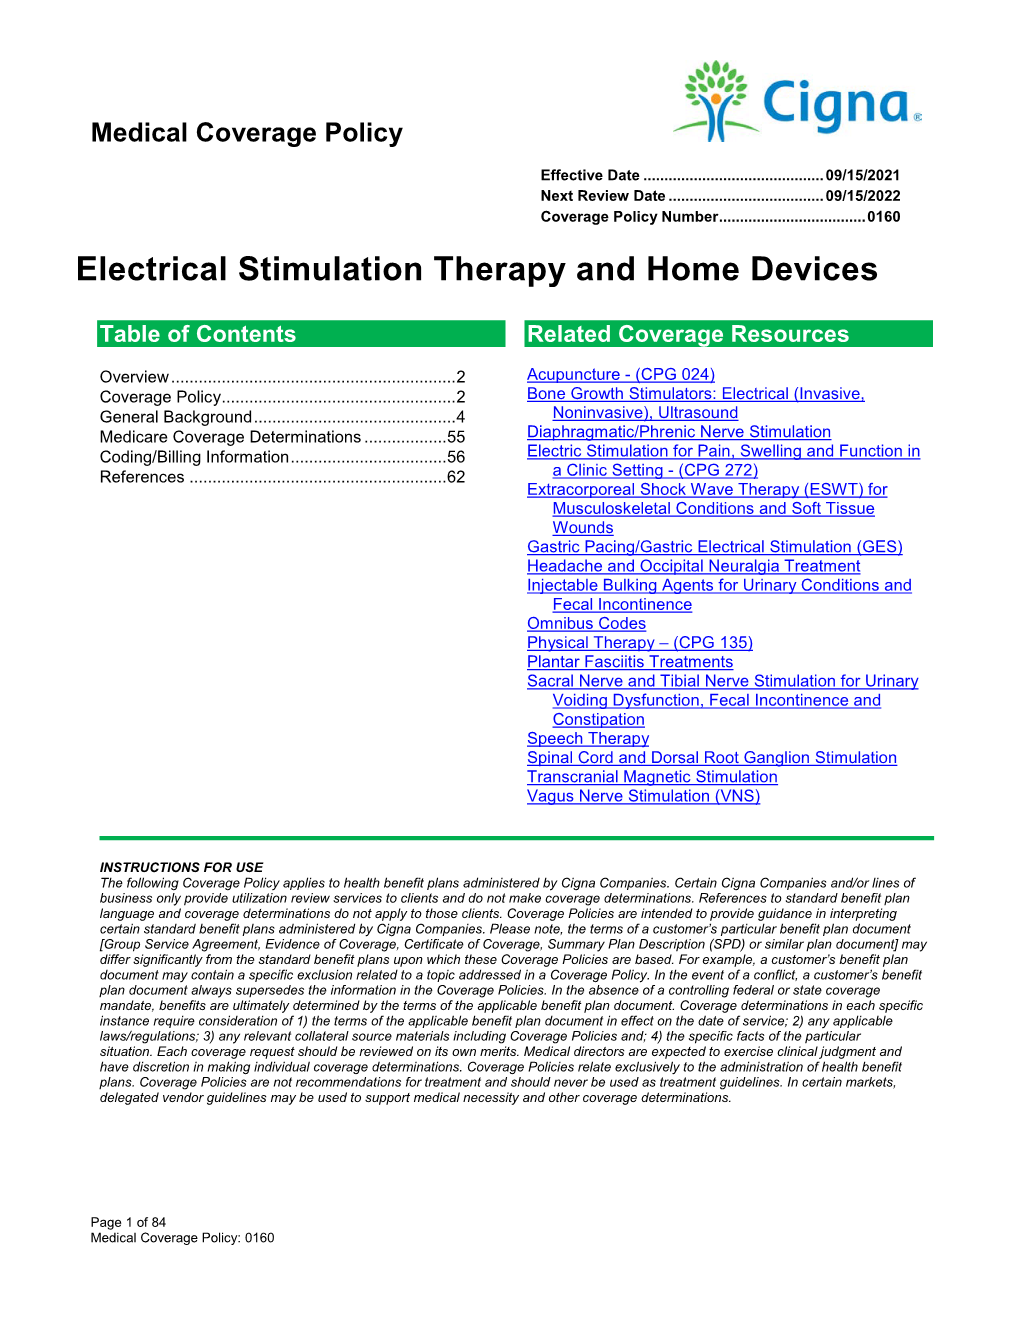 Electrical Stimulation Therapy and Home Devices